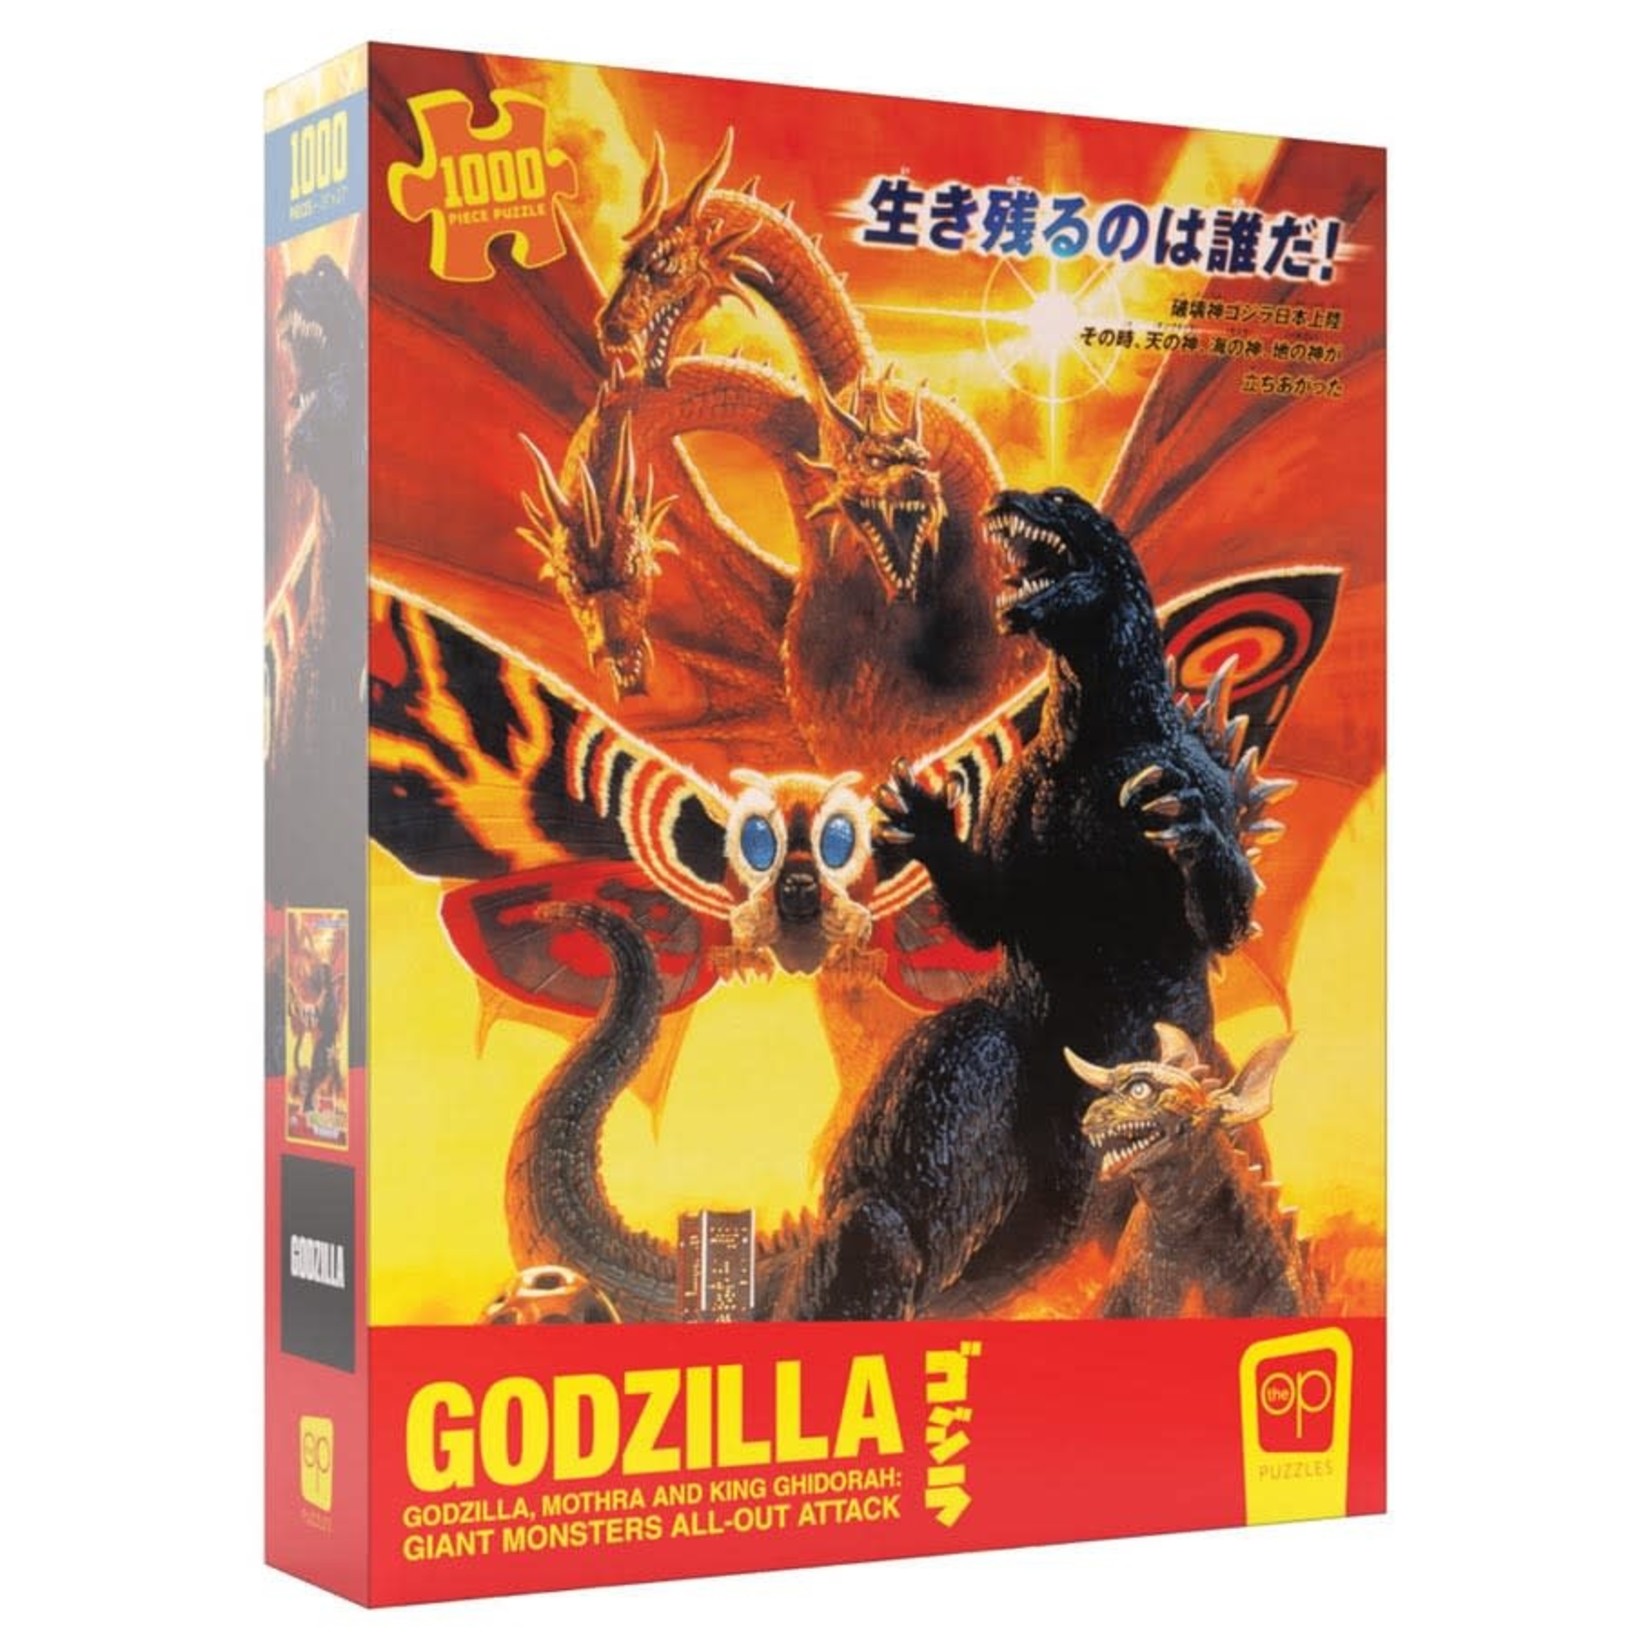 The OP-USAopoly Godzilla, Mothra, and King Ghidorah 1000 piece Puzzle